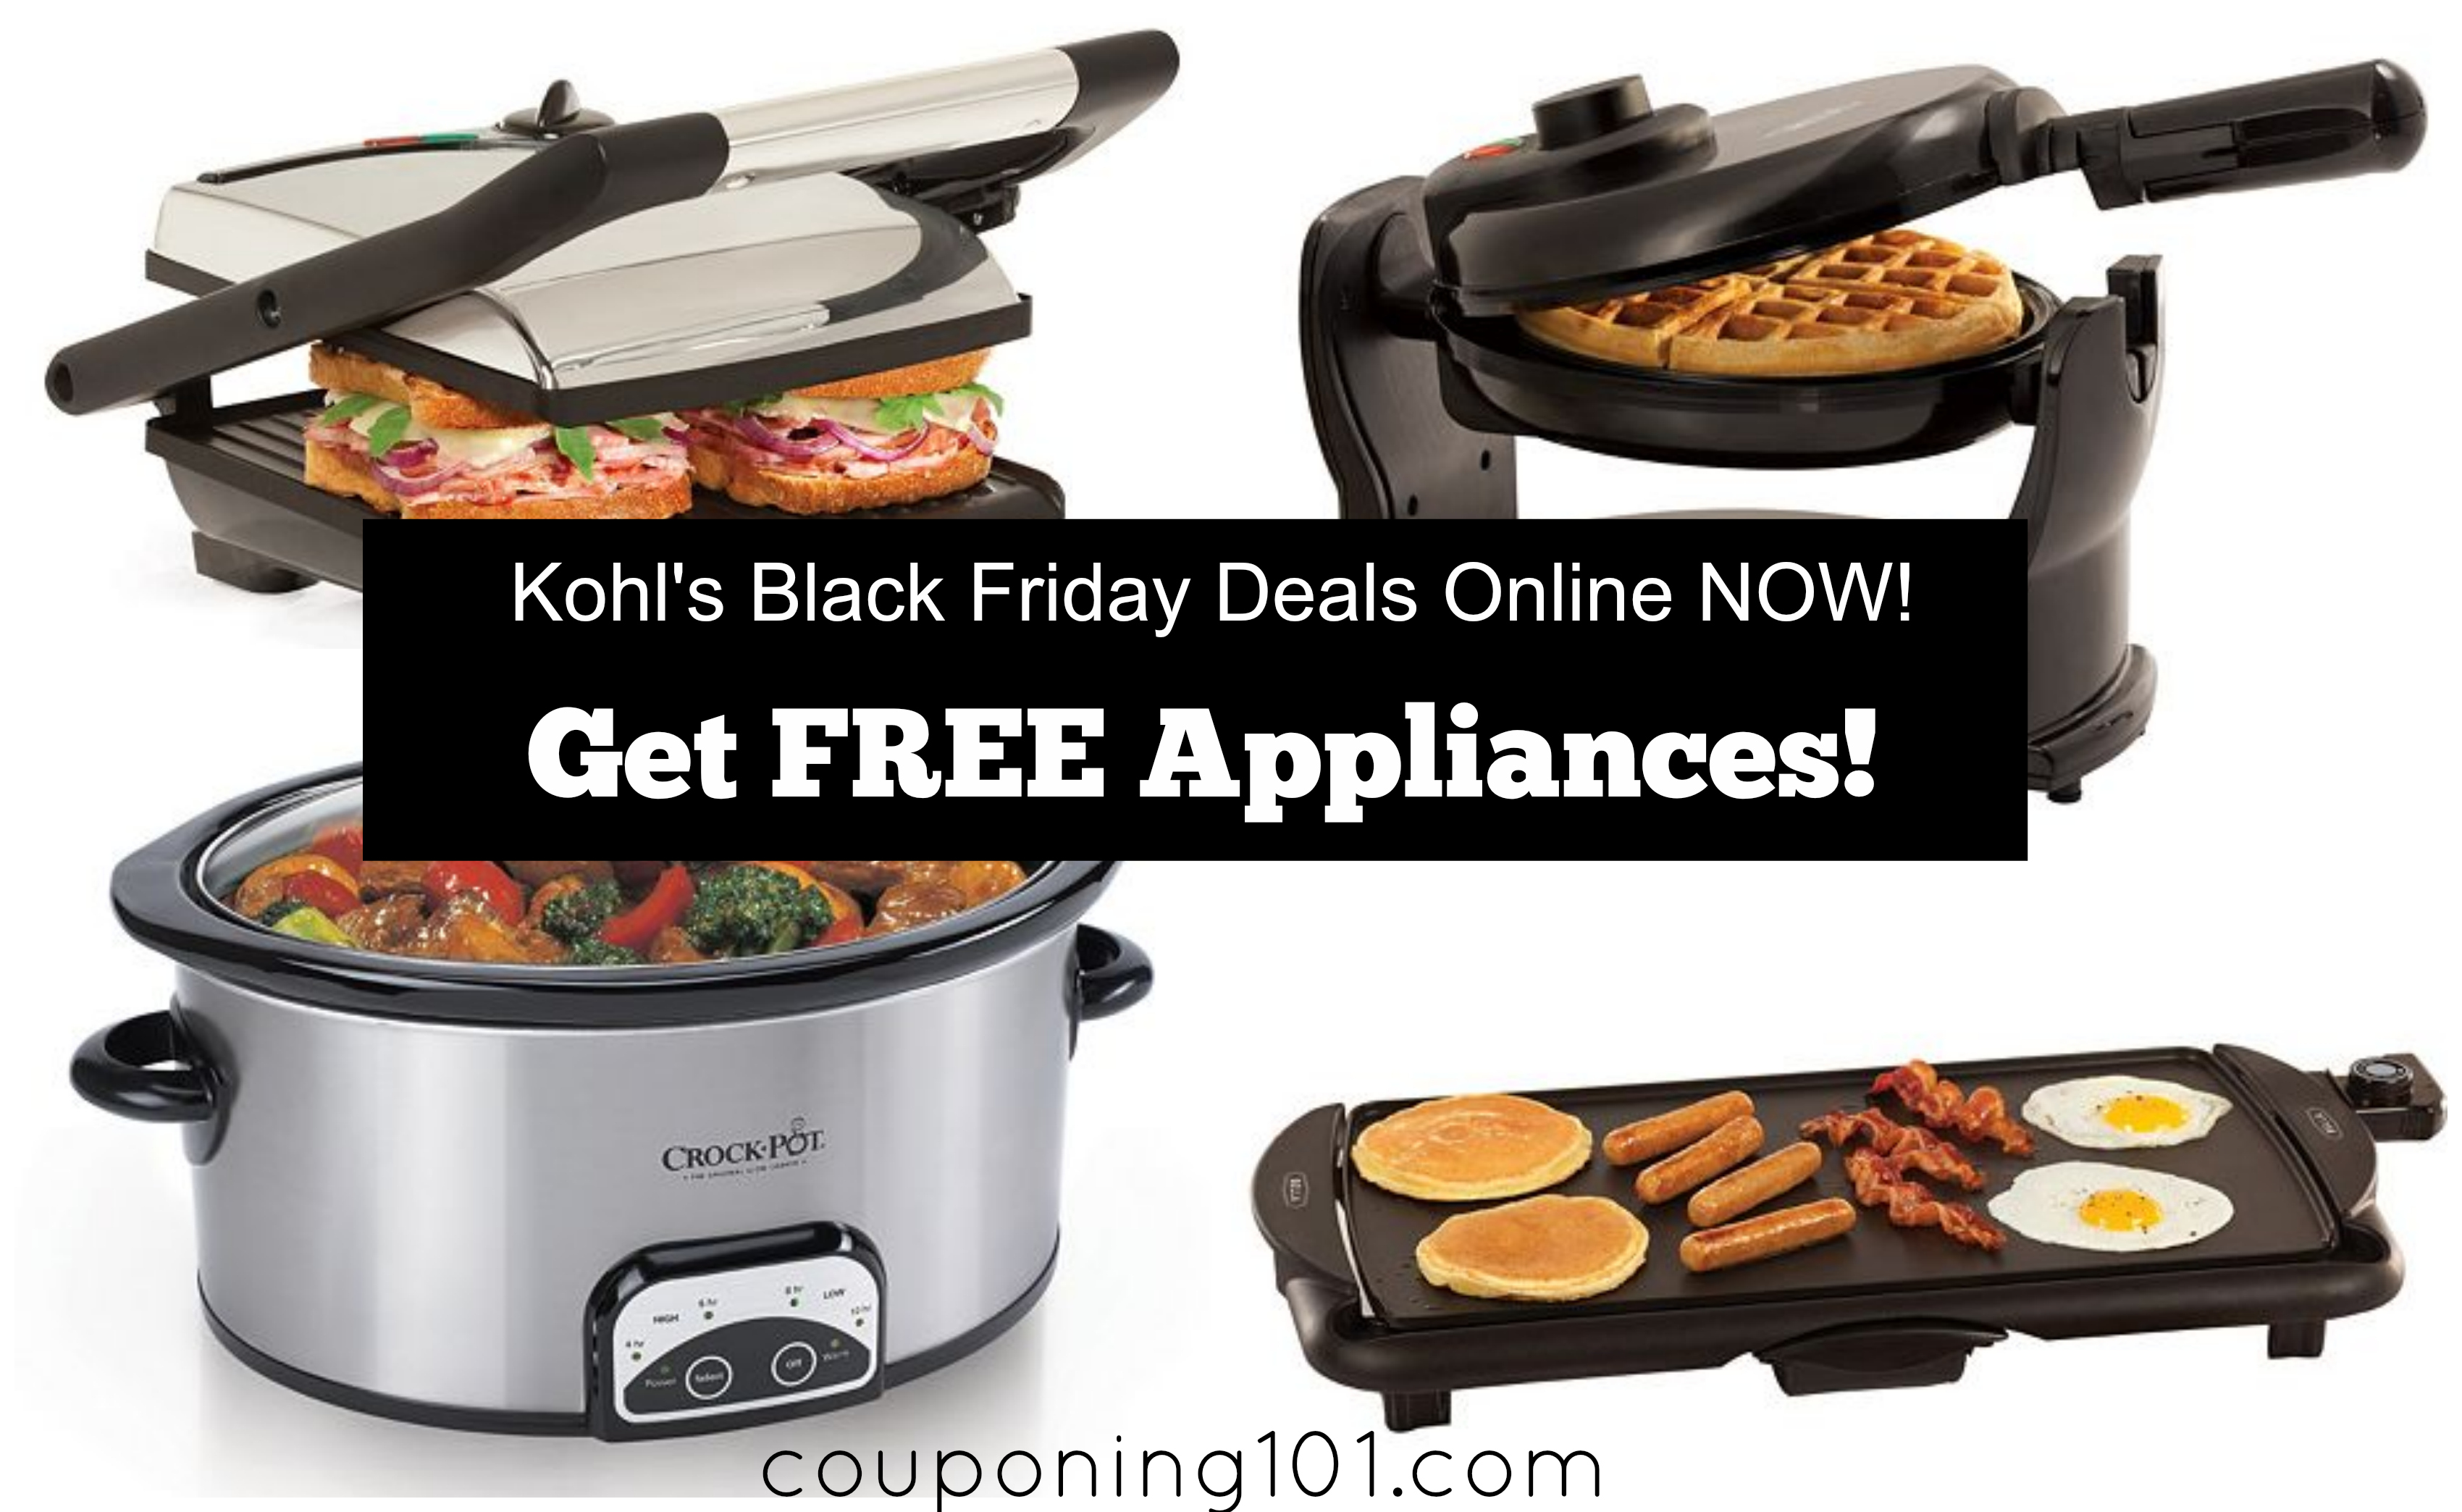 HOT deal!! Get 3 FREE small kitchen appliances from Kohl's after rebate!